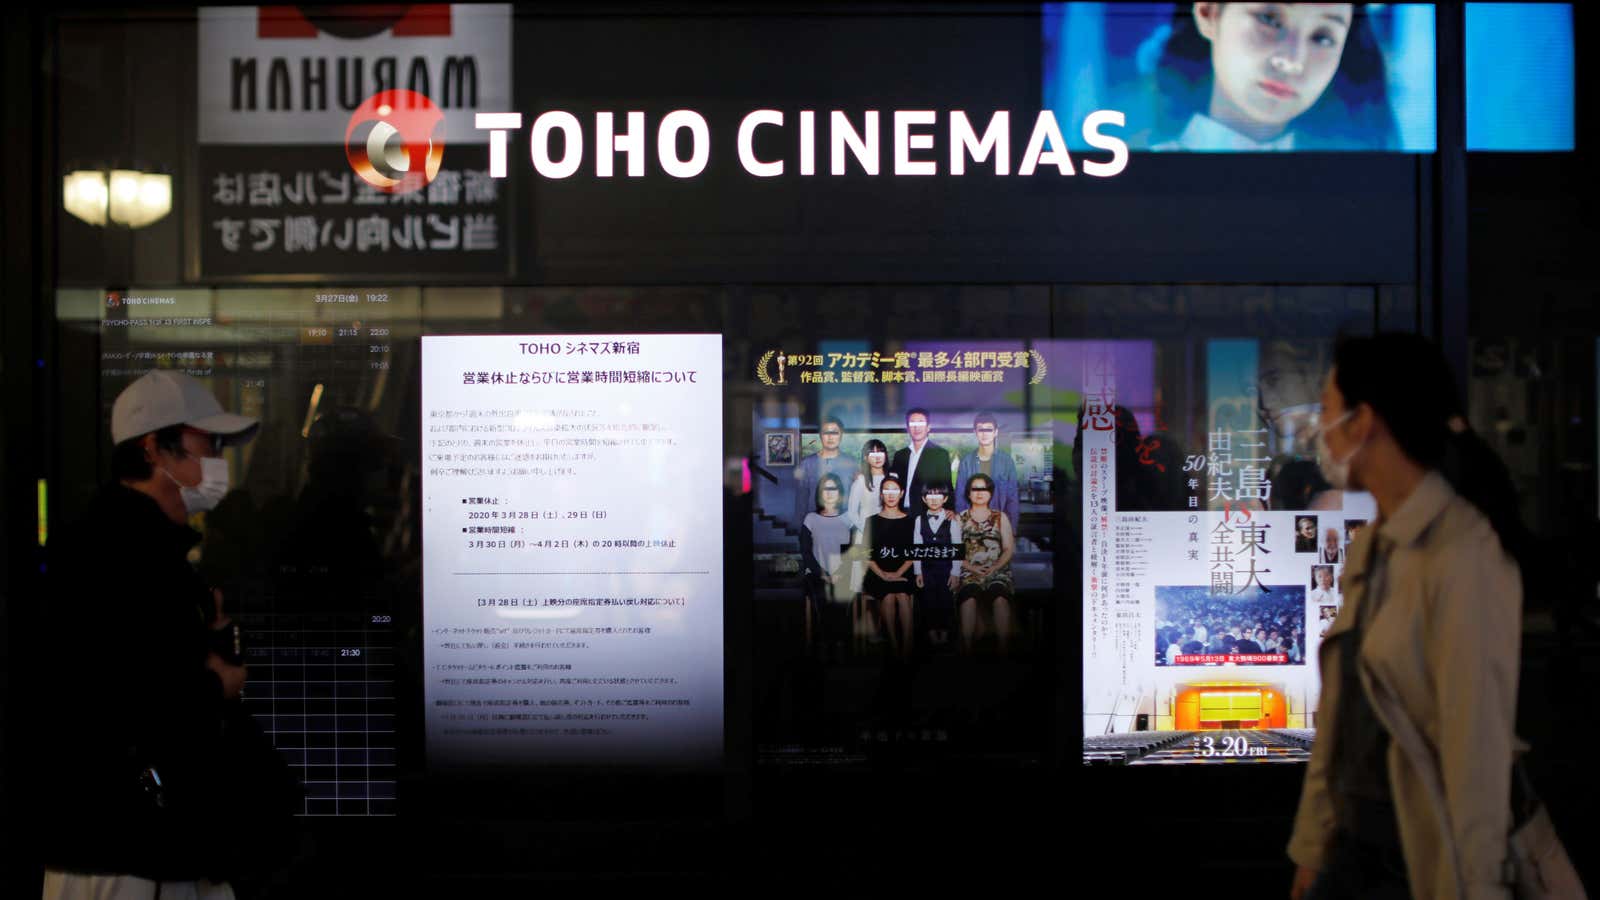 As US theaters close again, Japan is easing restrictions on theirs.